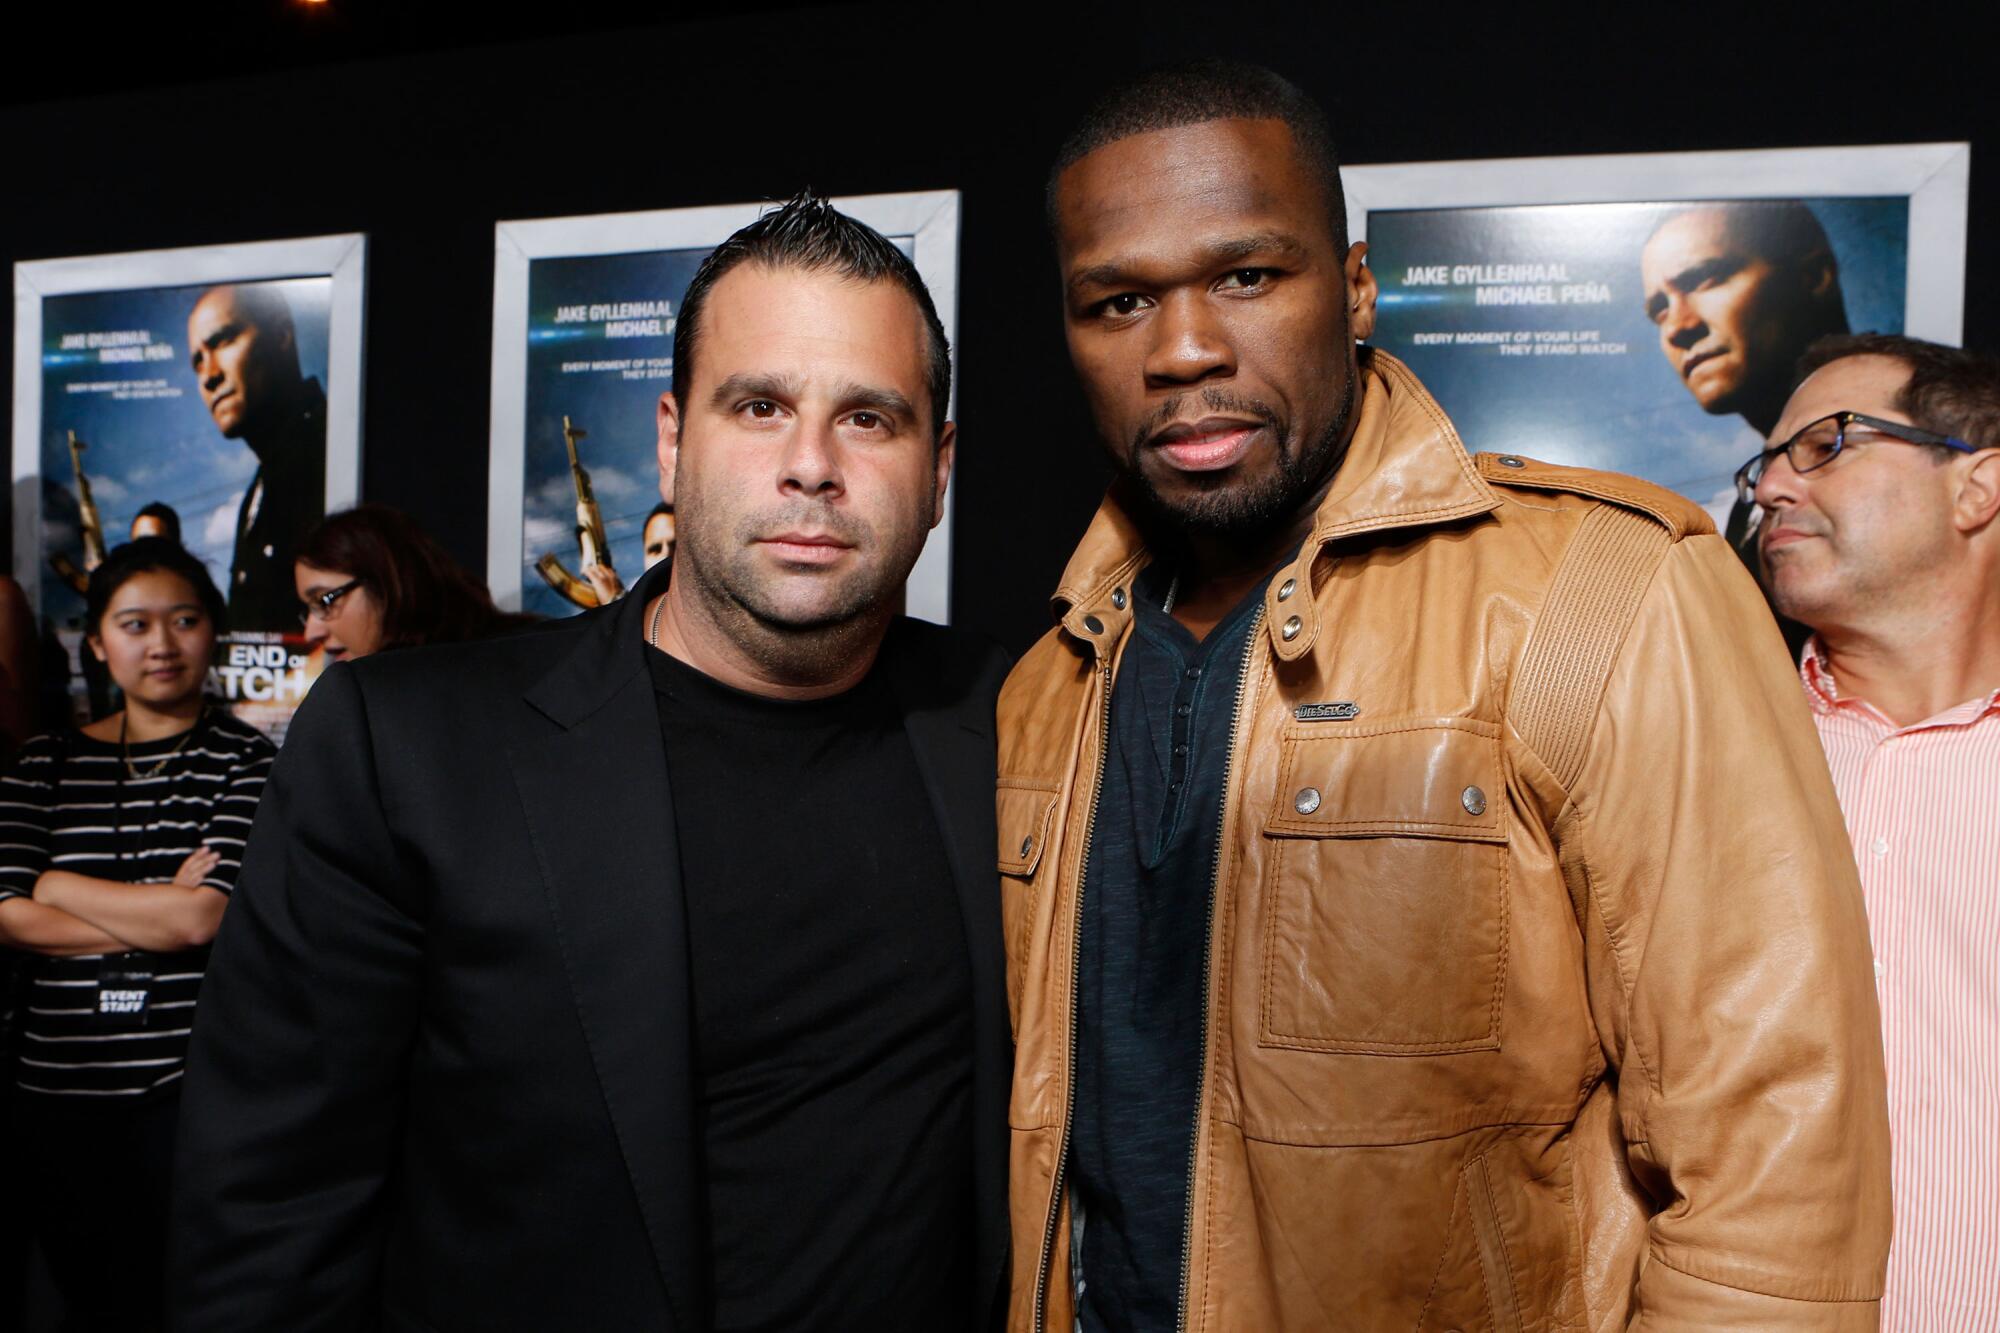 Randall Emmett, left, and 50 Cent at the "End of Watch" premiere on Sept. 17, 2012, in Los Angeles.